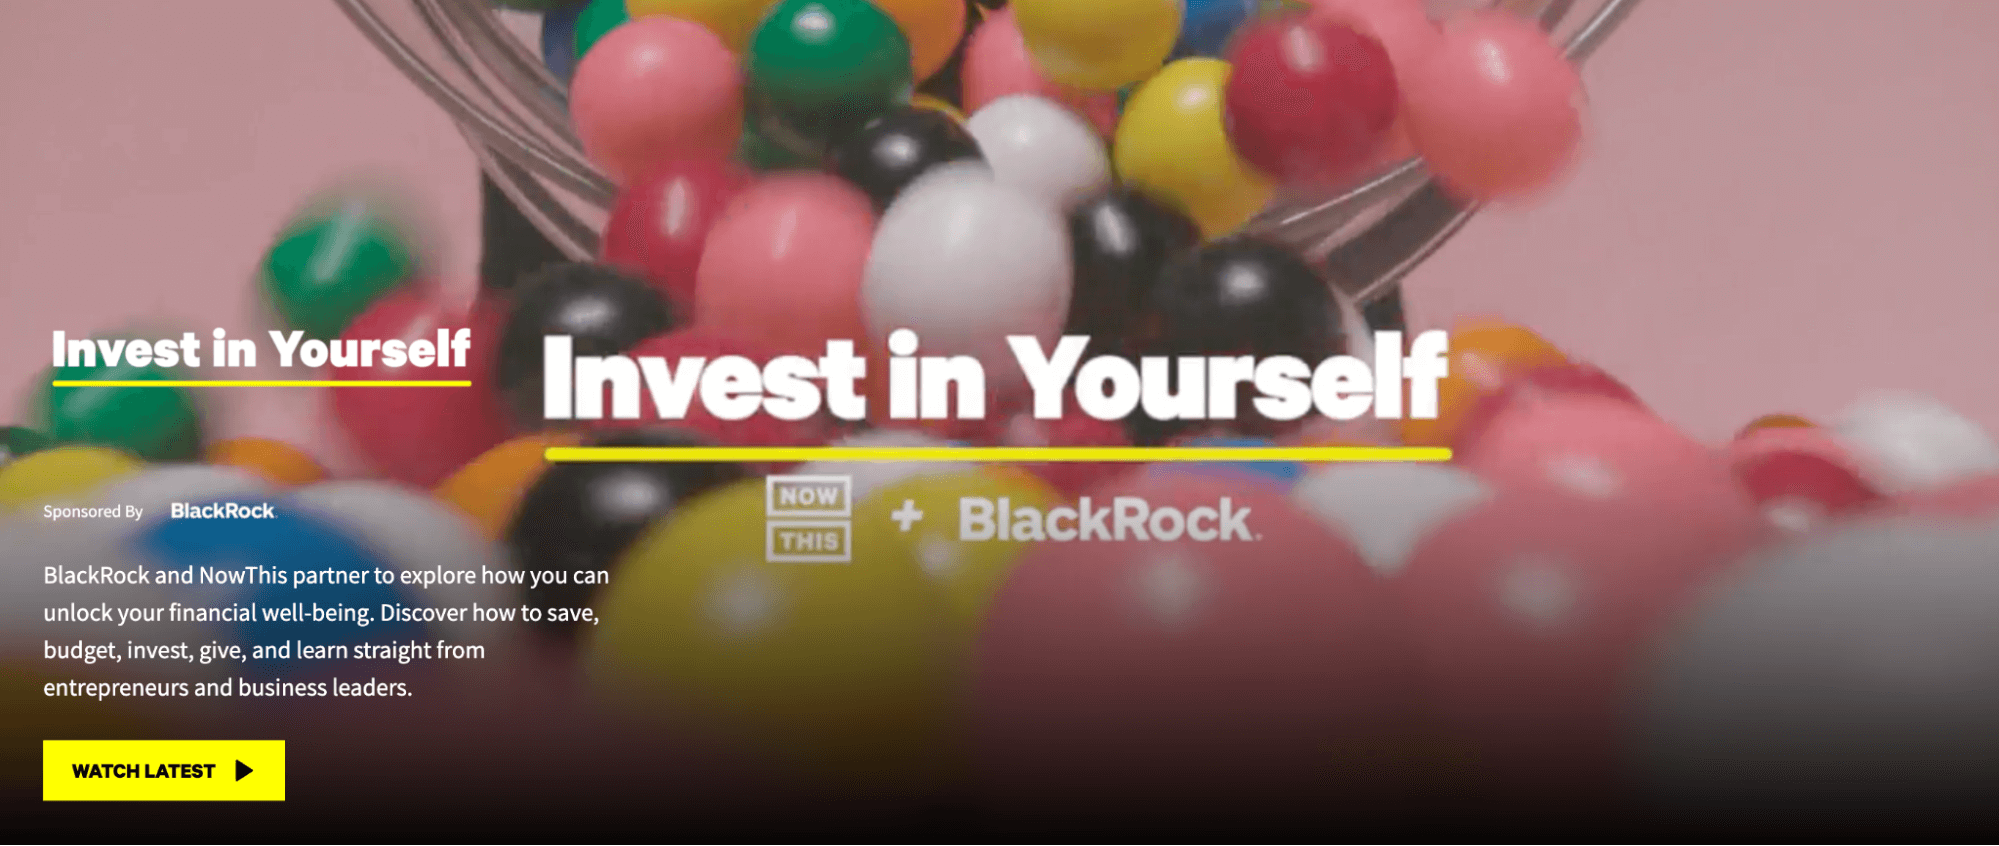 Invest in Yourself sponsored video